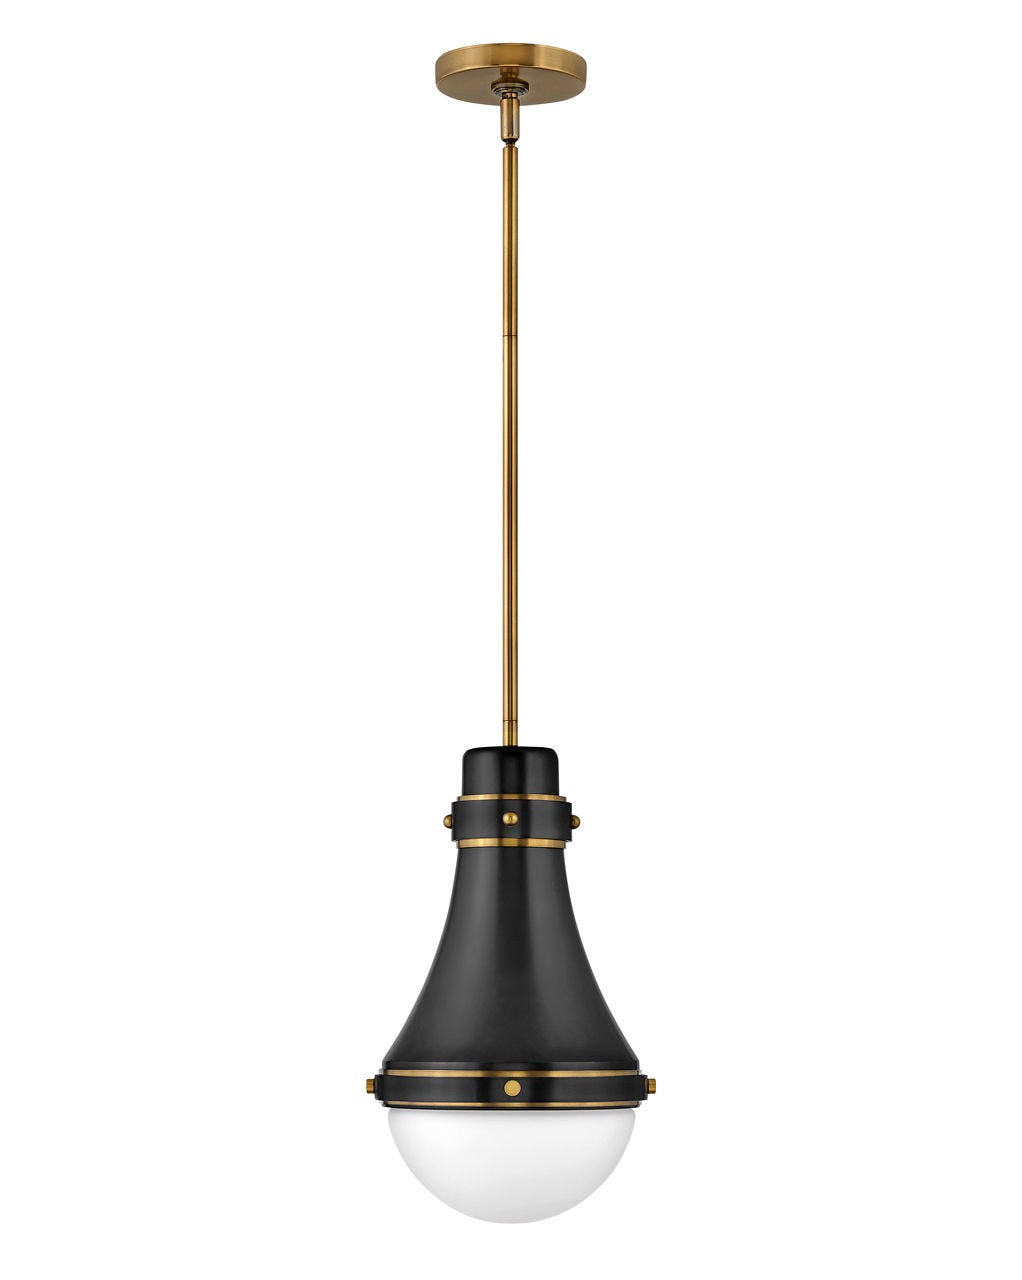 HInkley Oliver Small Pendant